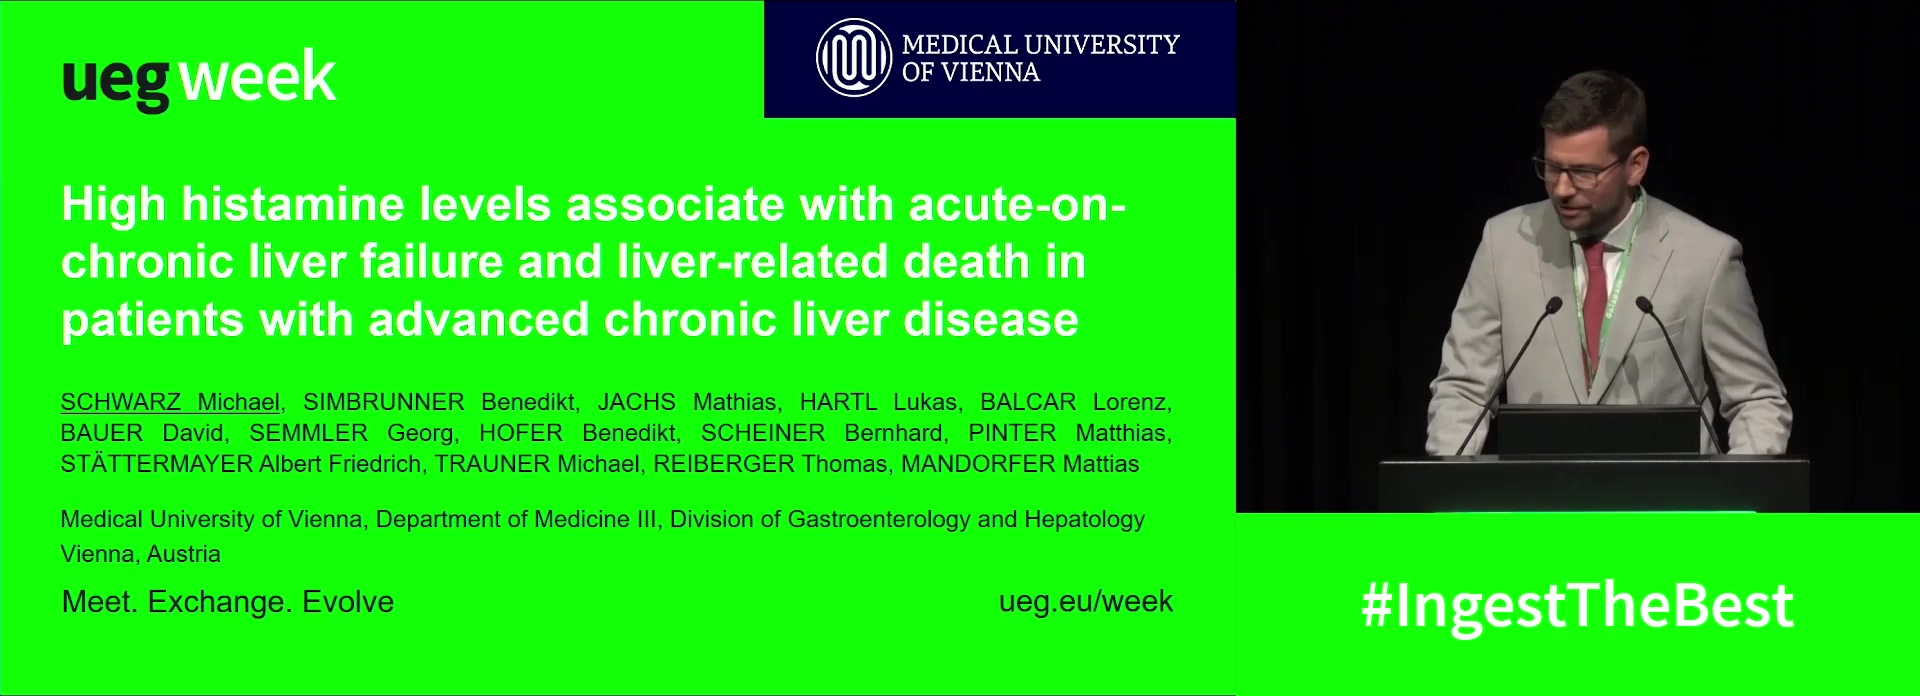 HIGH HISTAMINE LEVELS ASSOCIATE WITH ACUTE-ON-CHRONIC LIVER FAILURE AND LIVER-RELATED DEATH IN PATIENTS WITH ADVANCED CHRONIC LIVER DISEASE